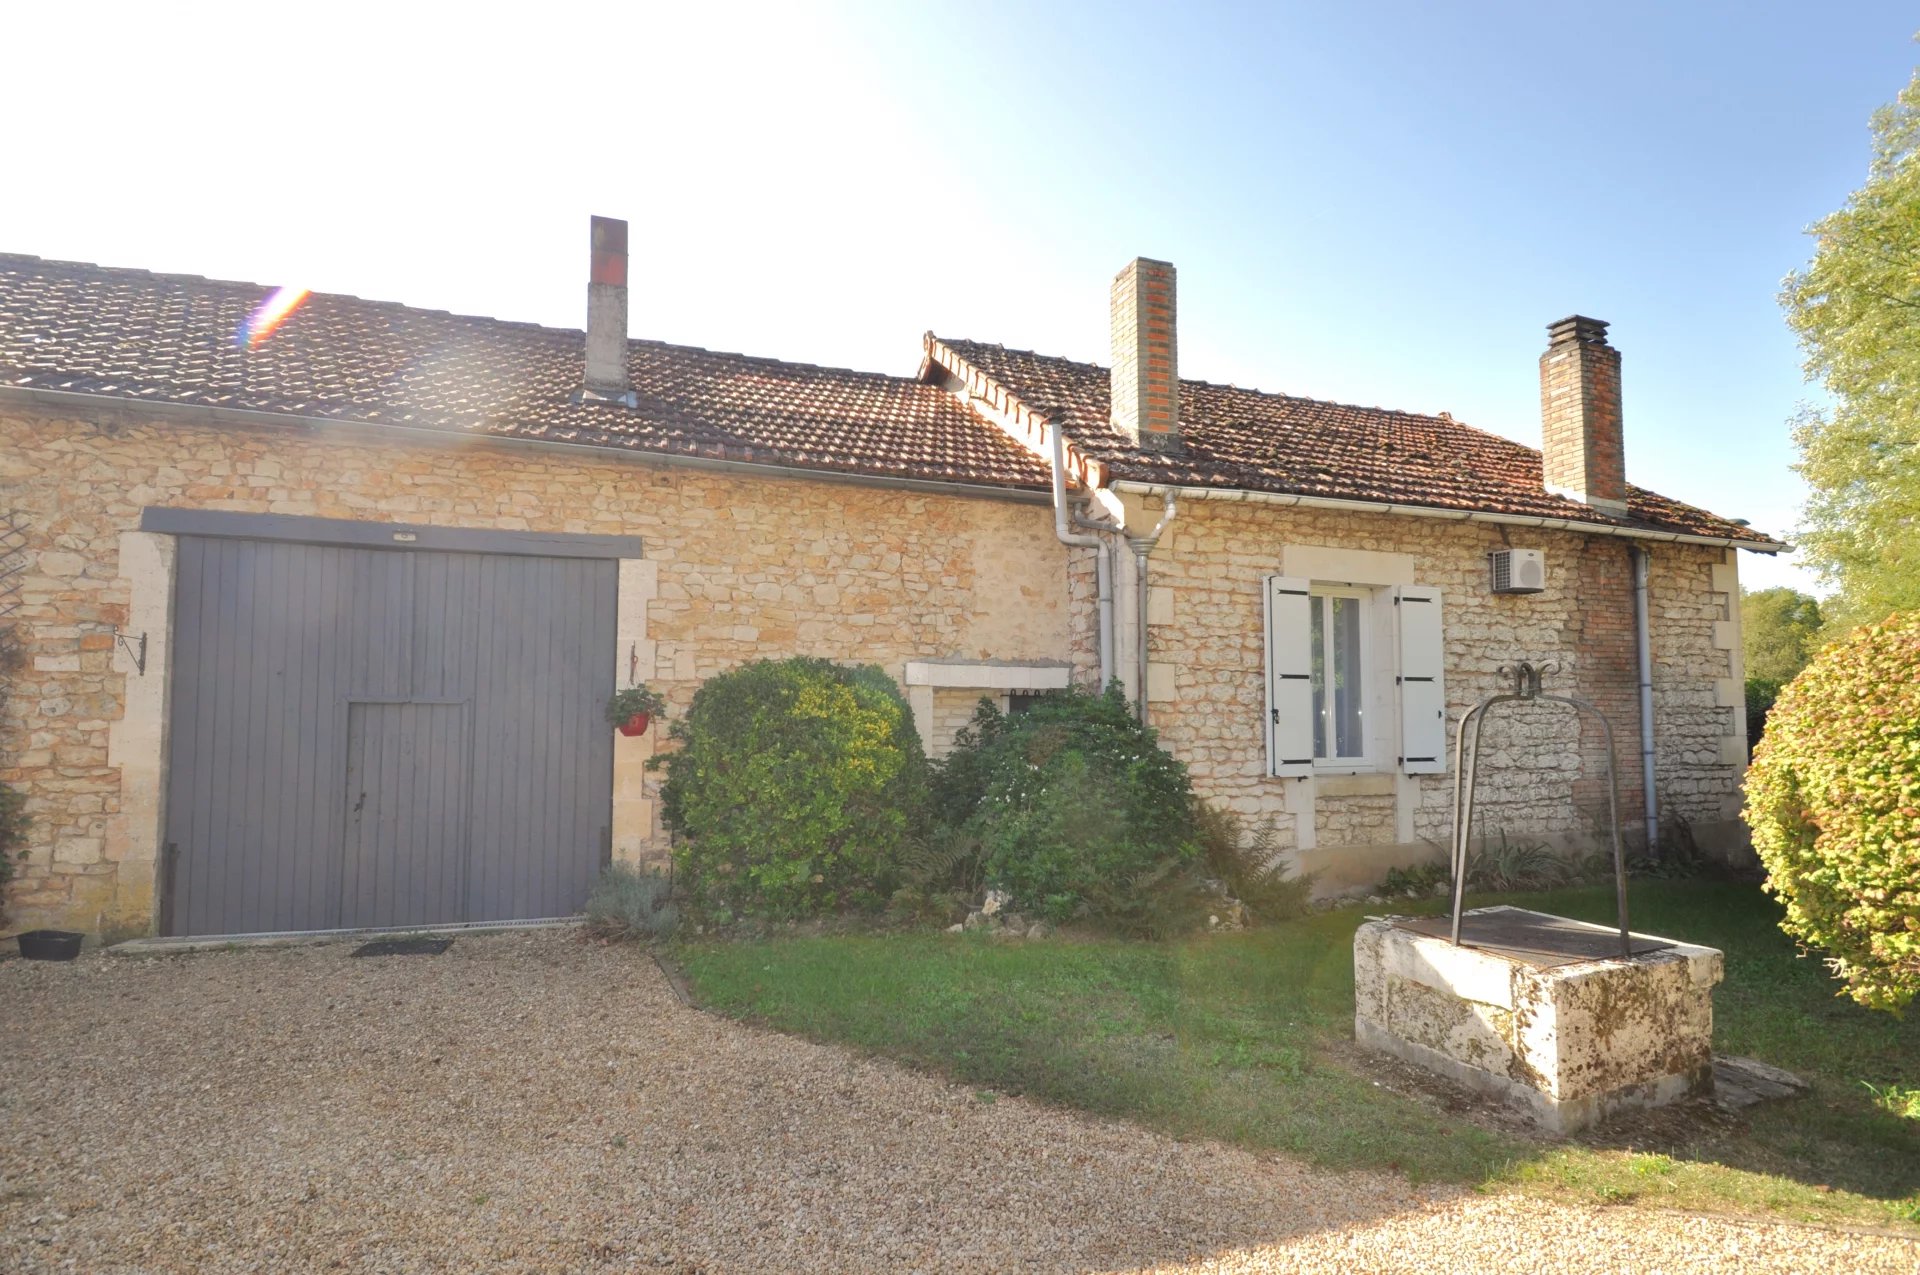 Renovated 4 bedroomed stone-built property with rental opportunity